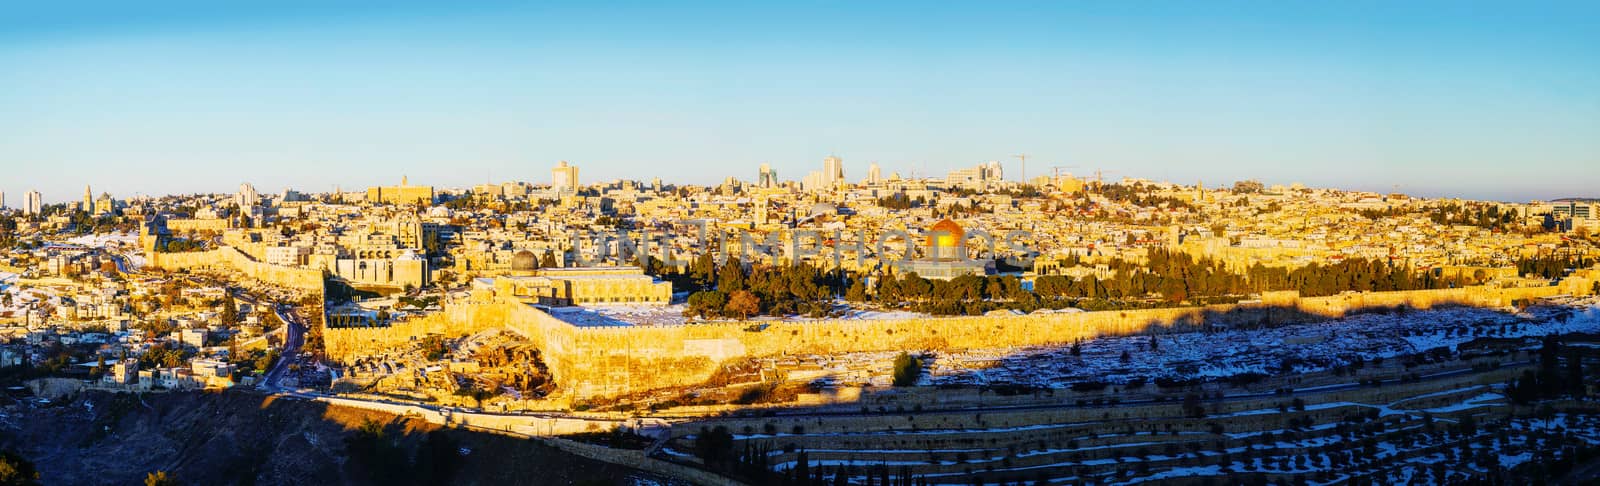 Old City in Jerusalem, Israel panorama by AndreyKr